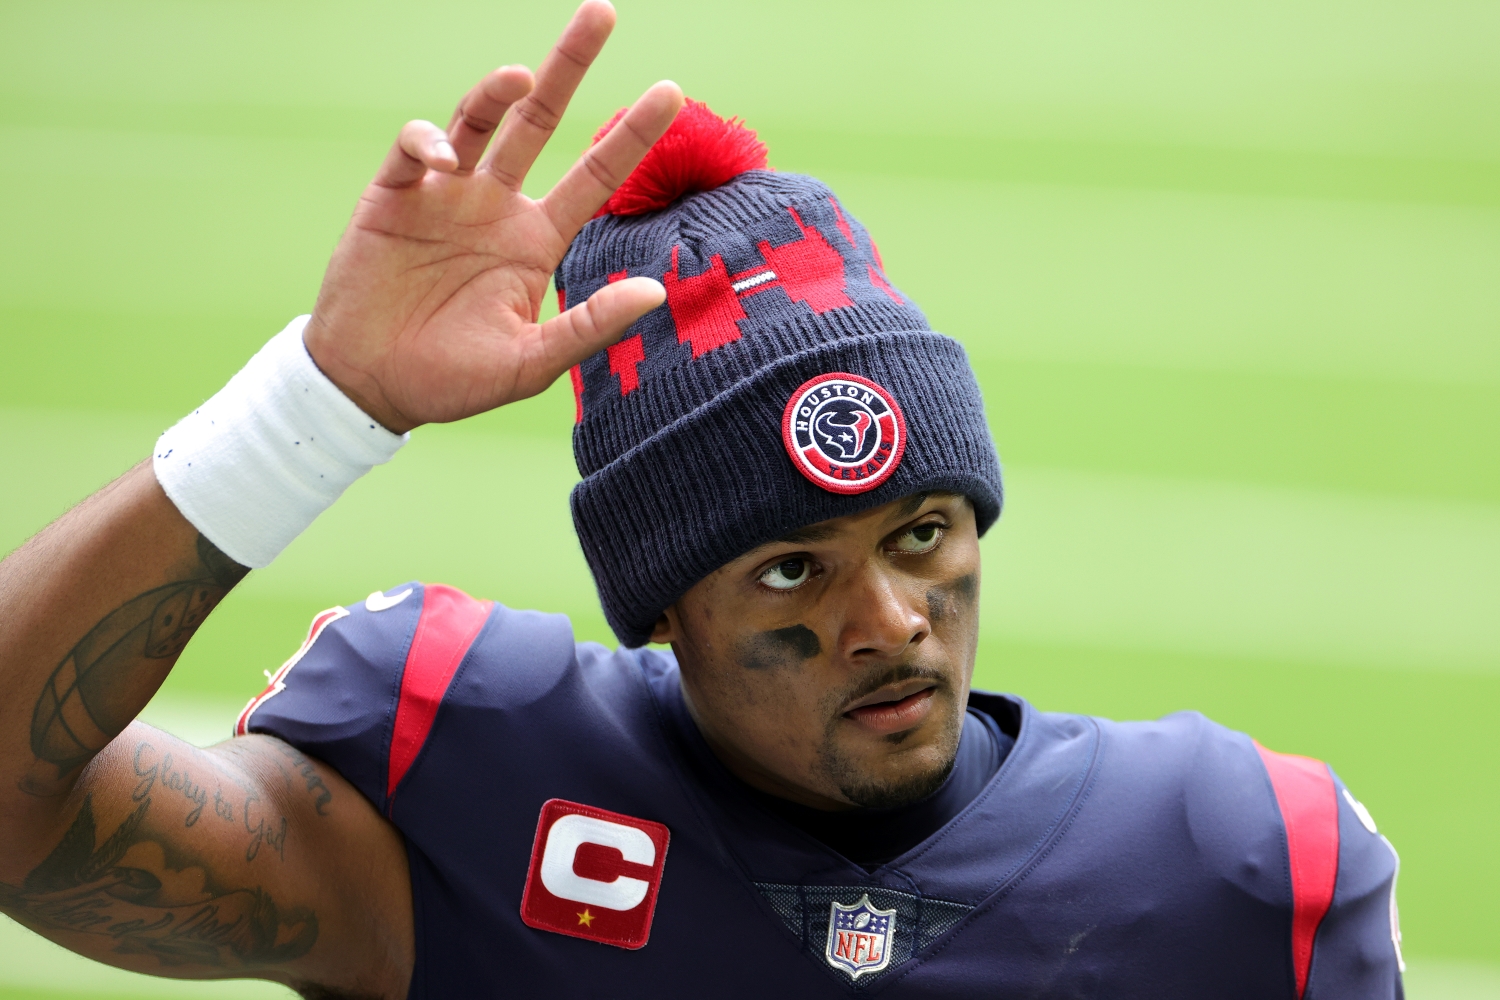 The Deshaun Watson Situation Just Took a Gut-Wrenching Turn for Texans Fans